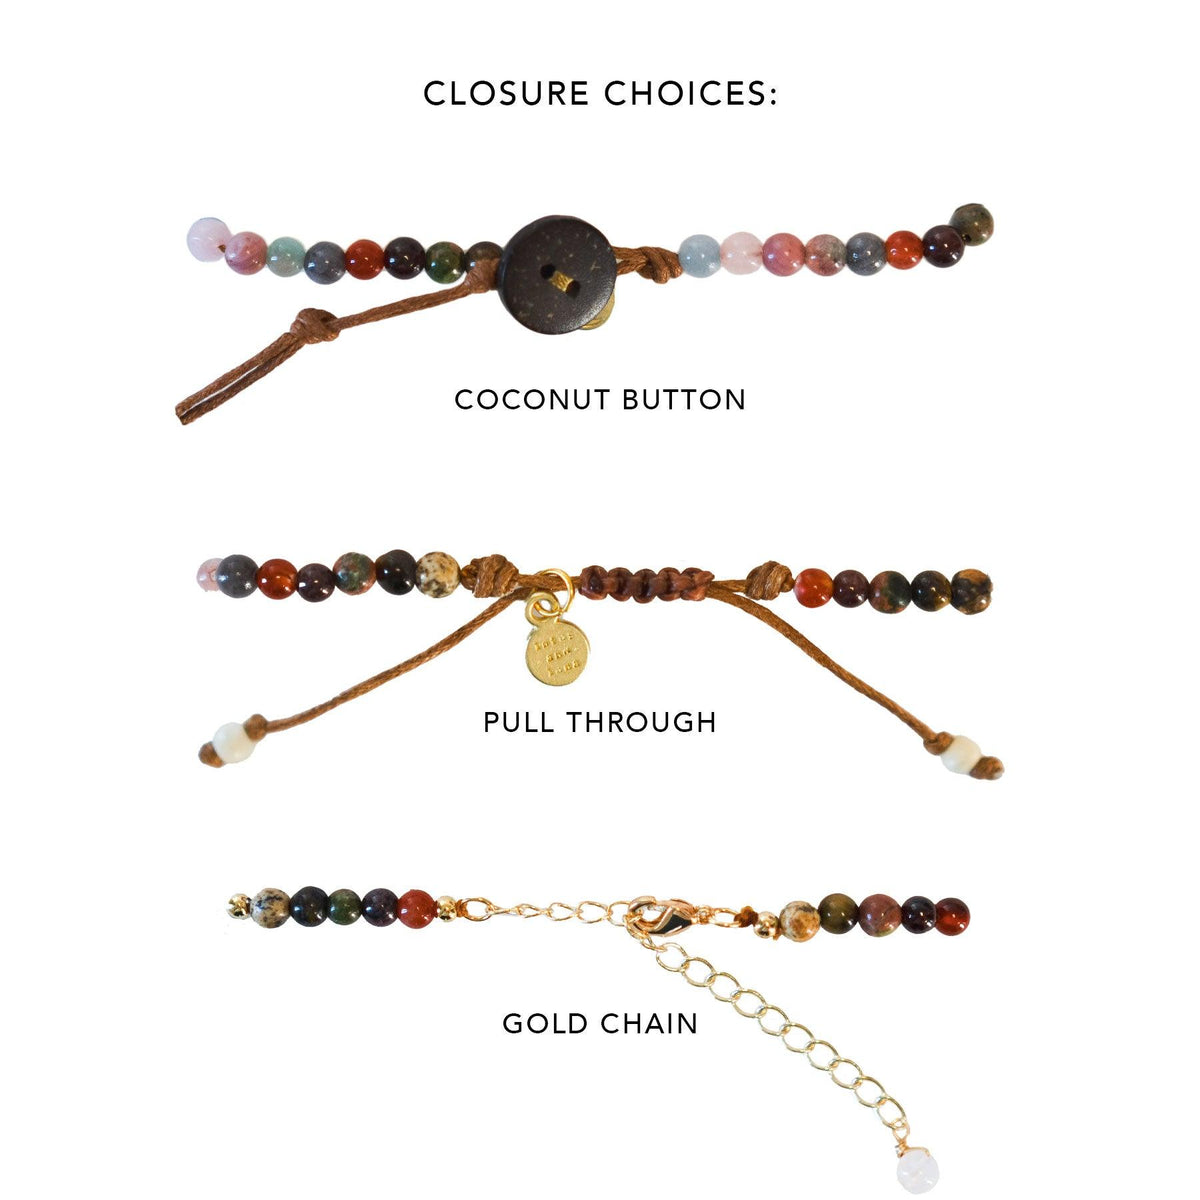 different closure options consisting of coconut button closure, a brown cotton pull through closure and a simple gold chain clasp